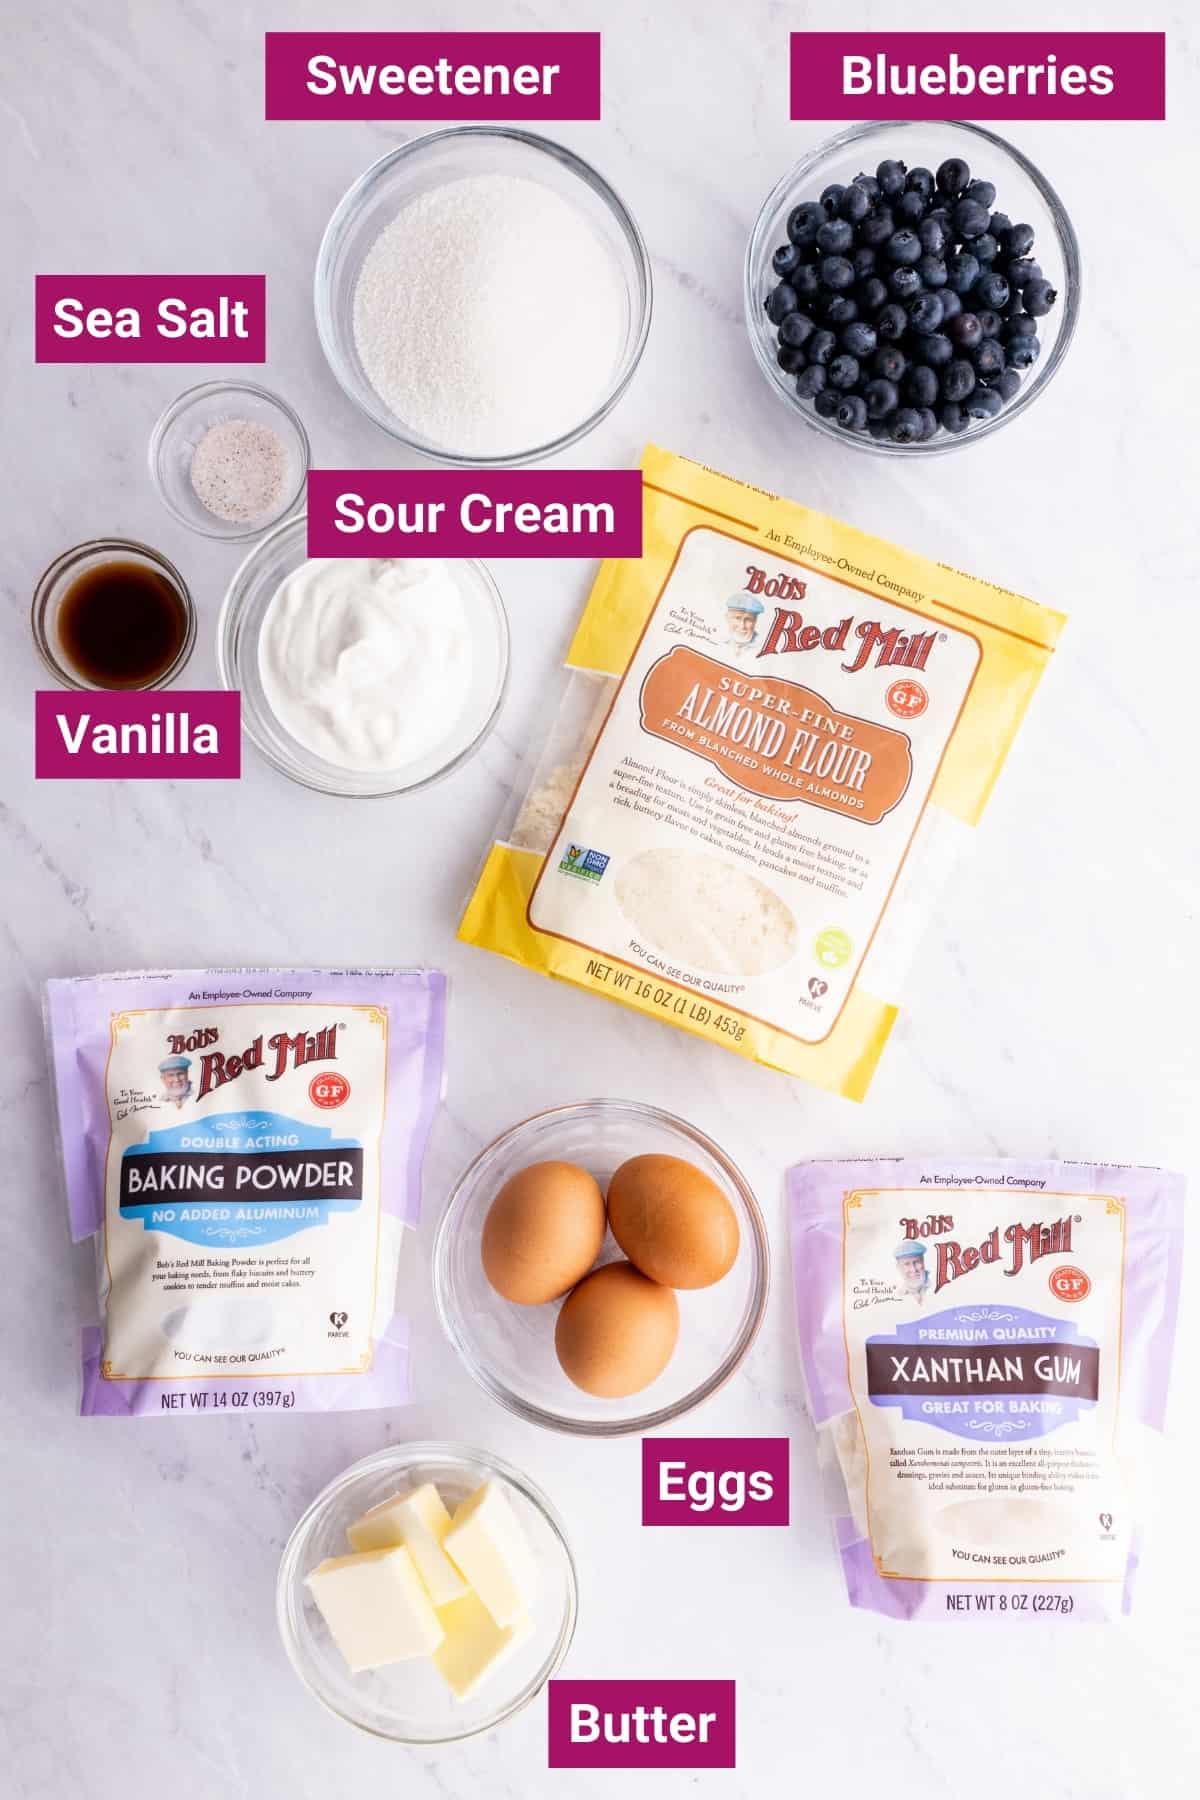 ingredients needed to make the best keto blueberry muffins with almond flour like fresh blueberries, sour cream, keto sweetened, baking powder, Xanthan Gum, eggs, butter, vanilla, and sea salt